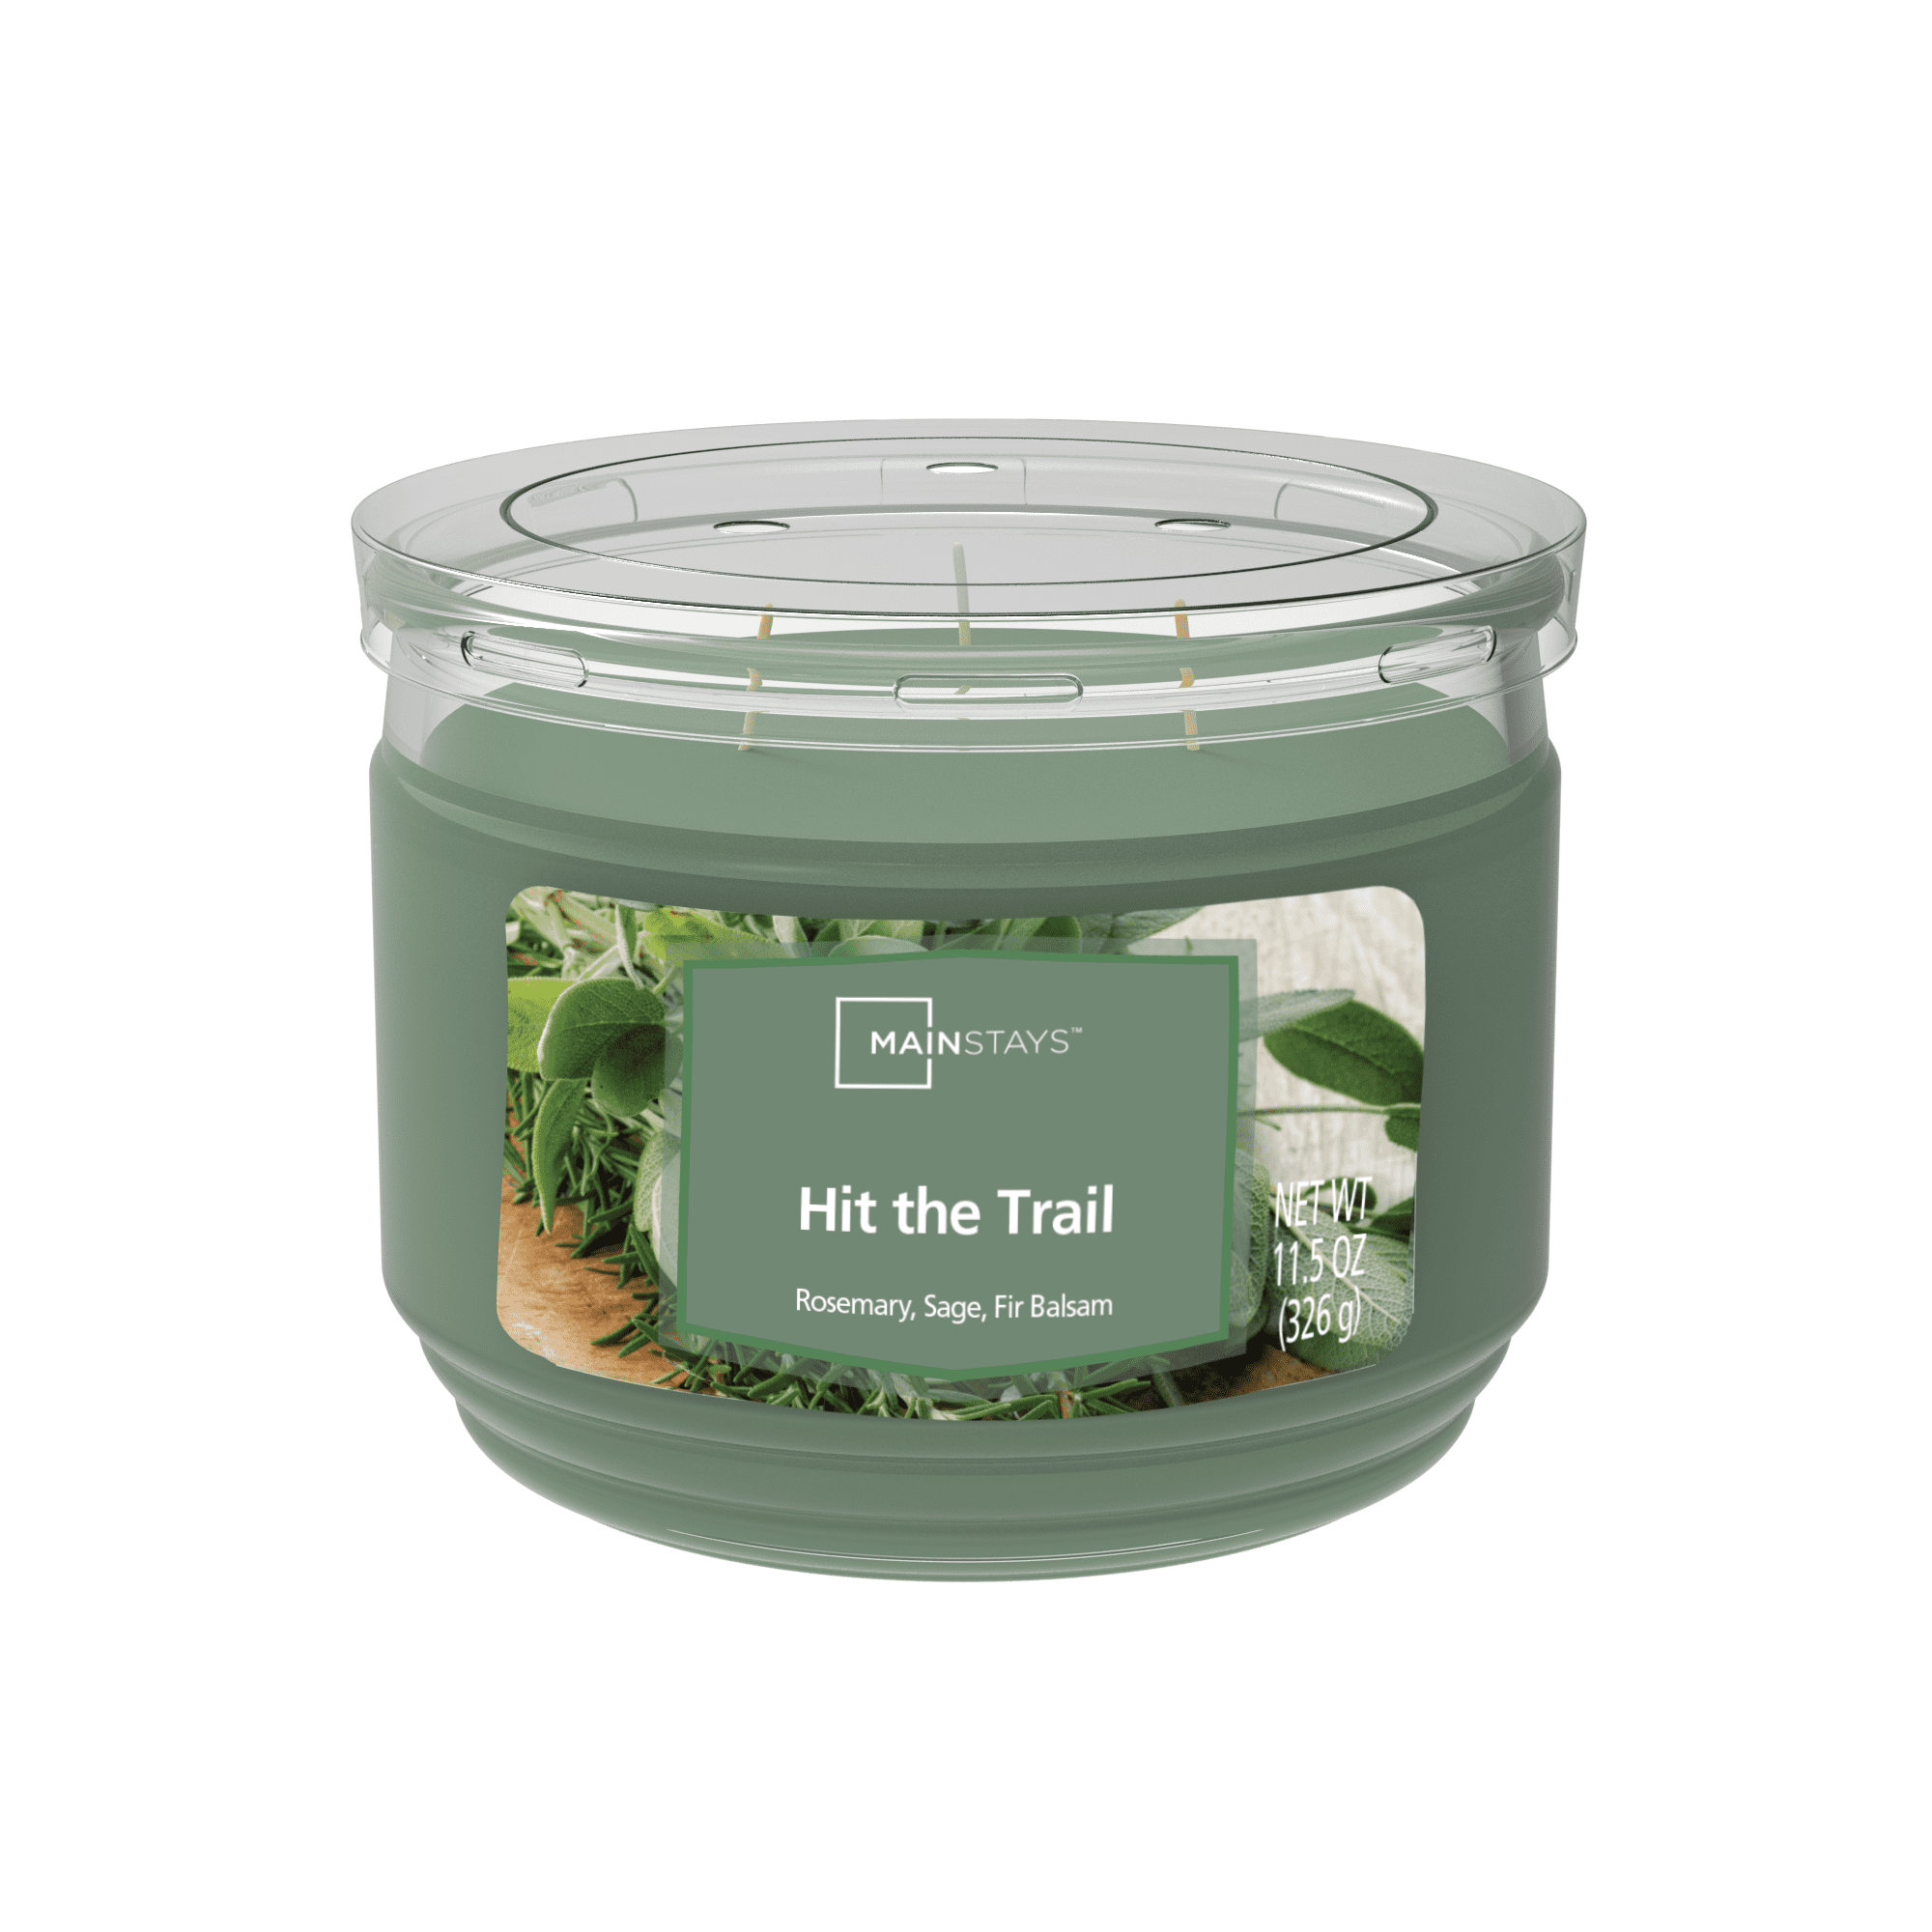 Mainstays Hit the Trail 3-Wick 11.5 oz. Scented Glass Jar Candle